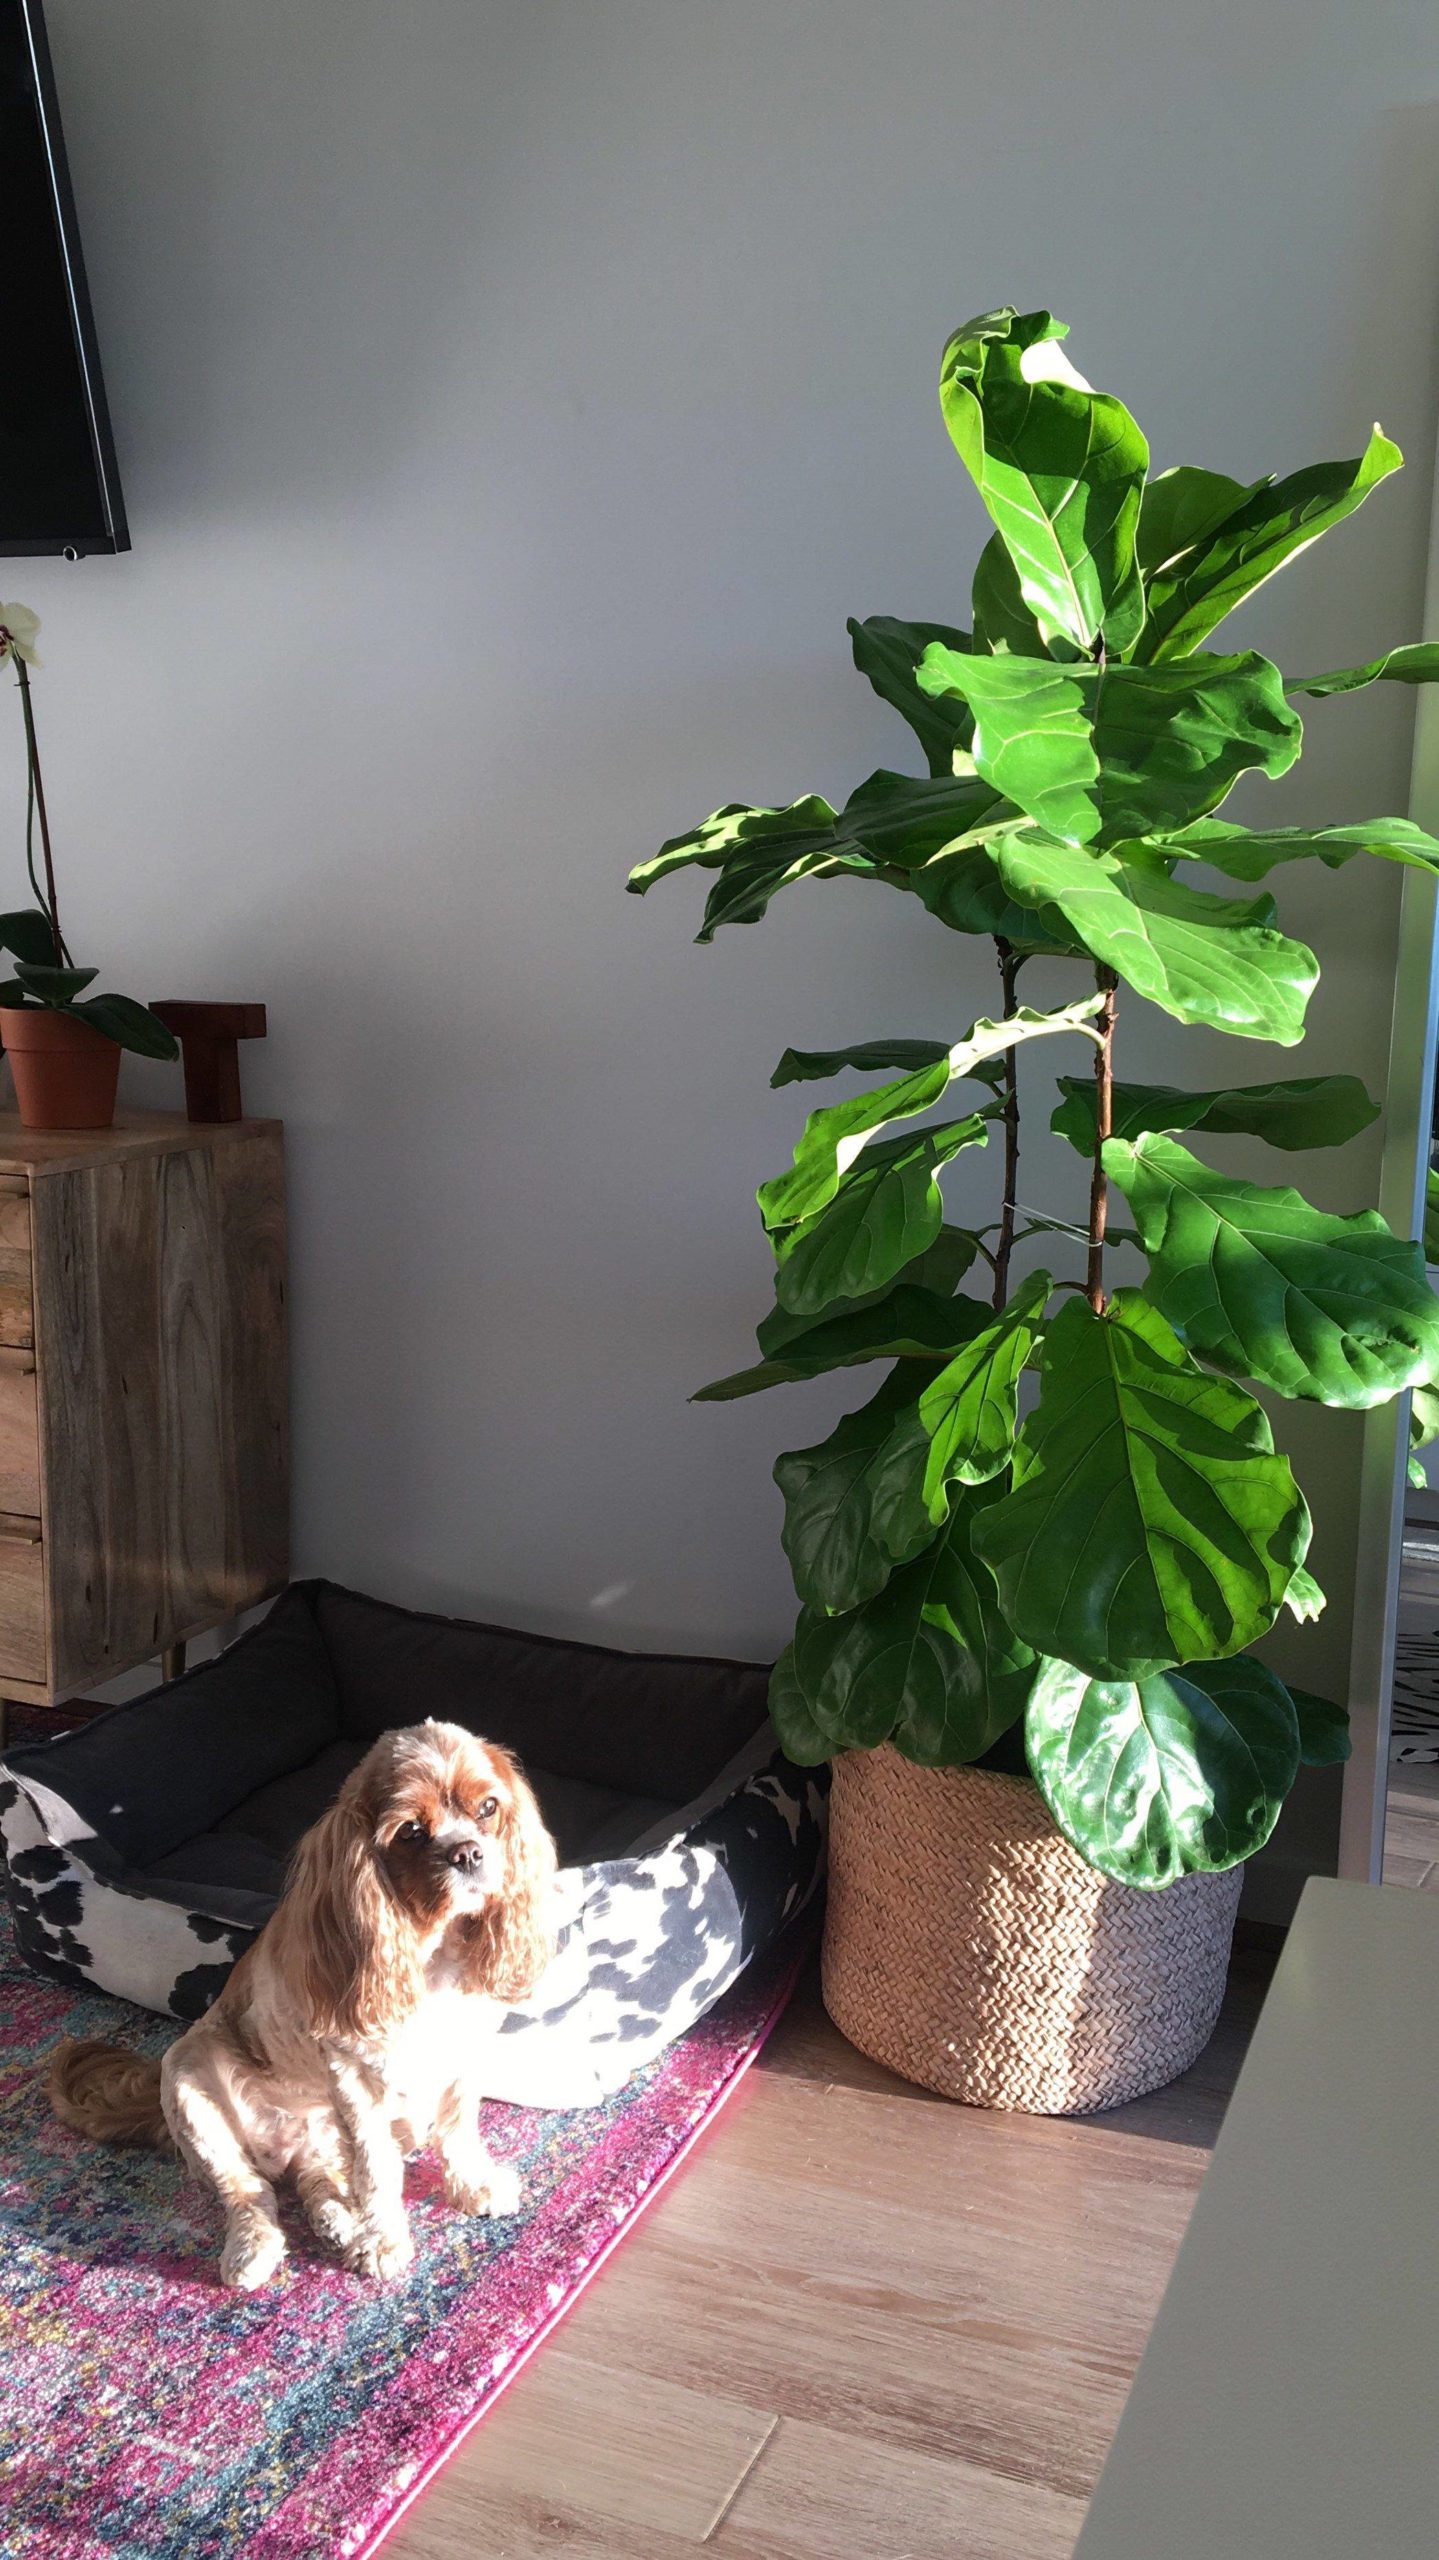 A Fiddle Leaf and a pup named Haley